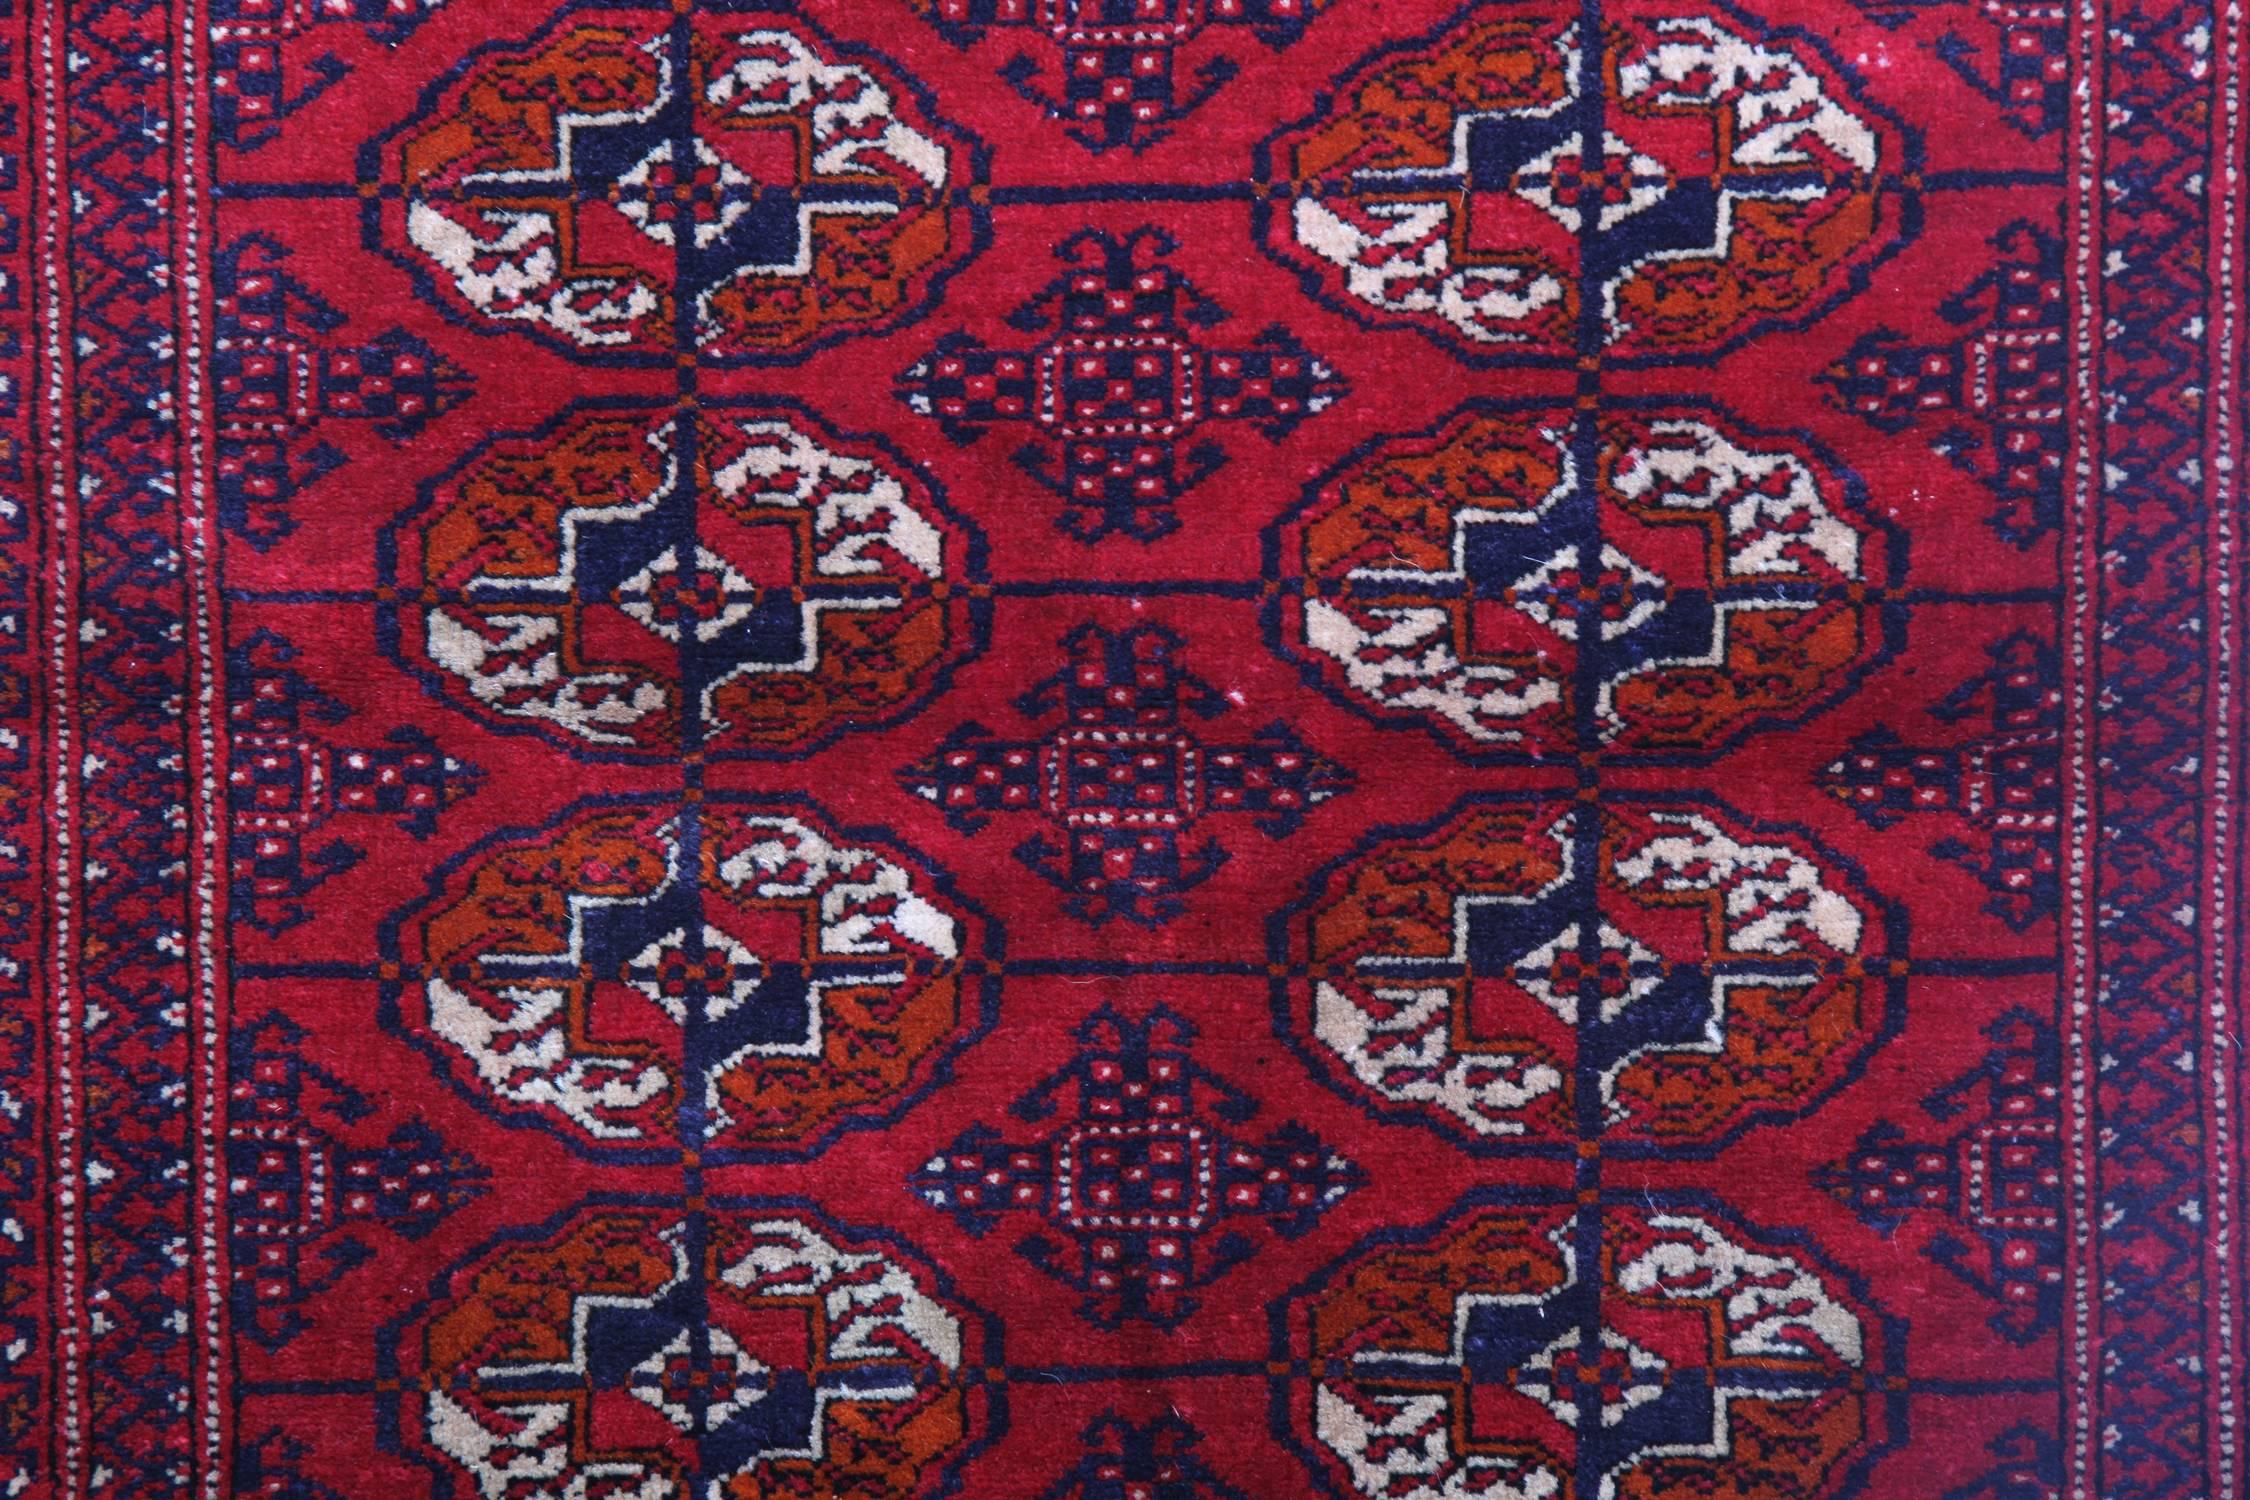 Rustic Antique Rugs Turkman Traditional Red Rug, Handmade Wool Area Rug